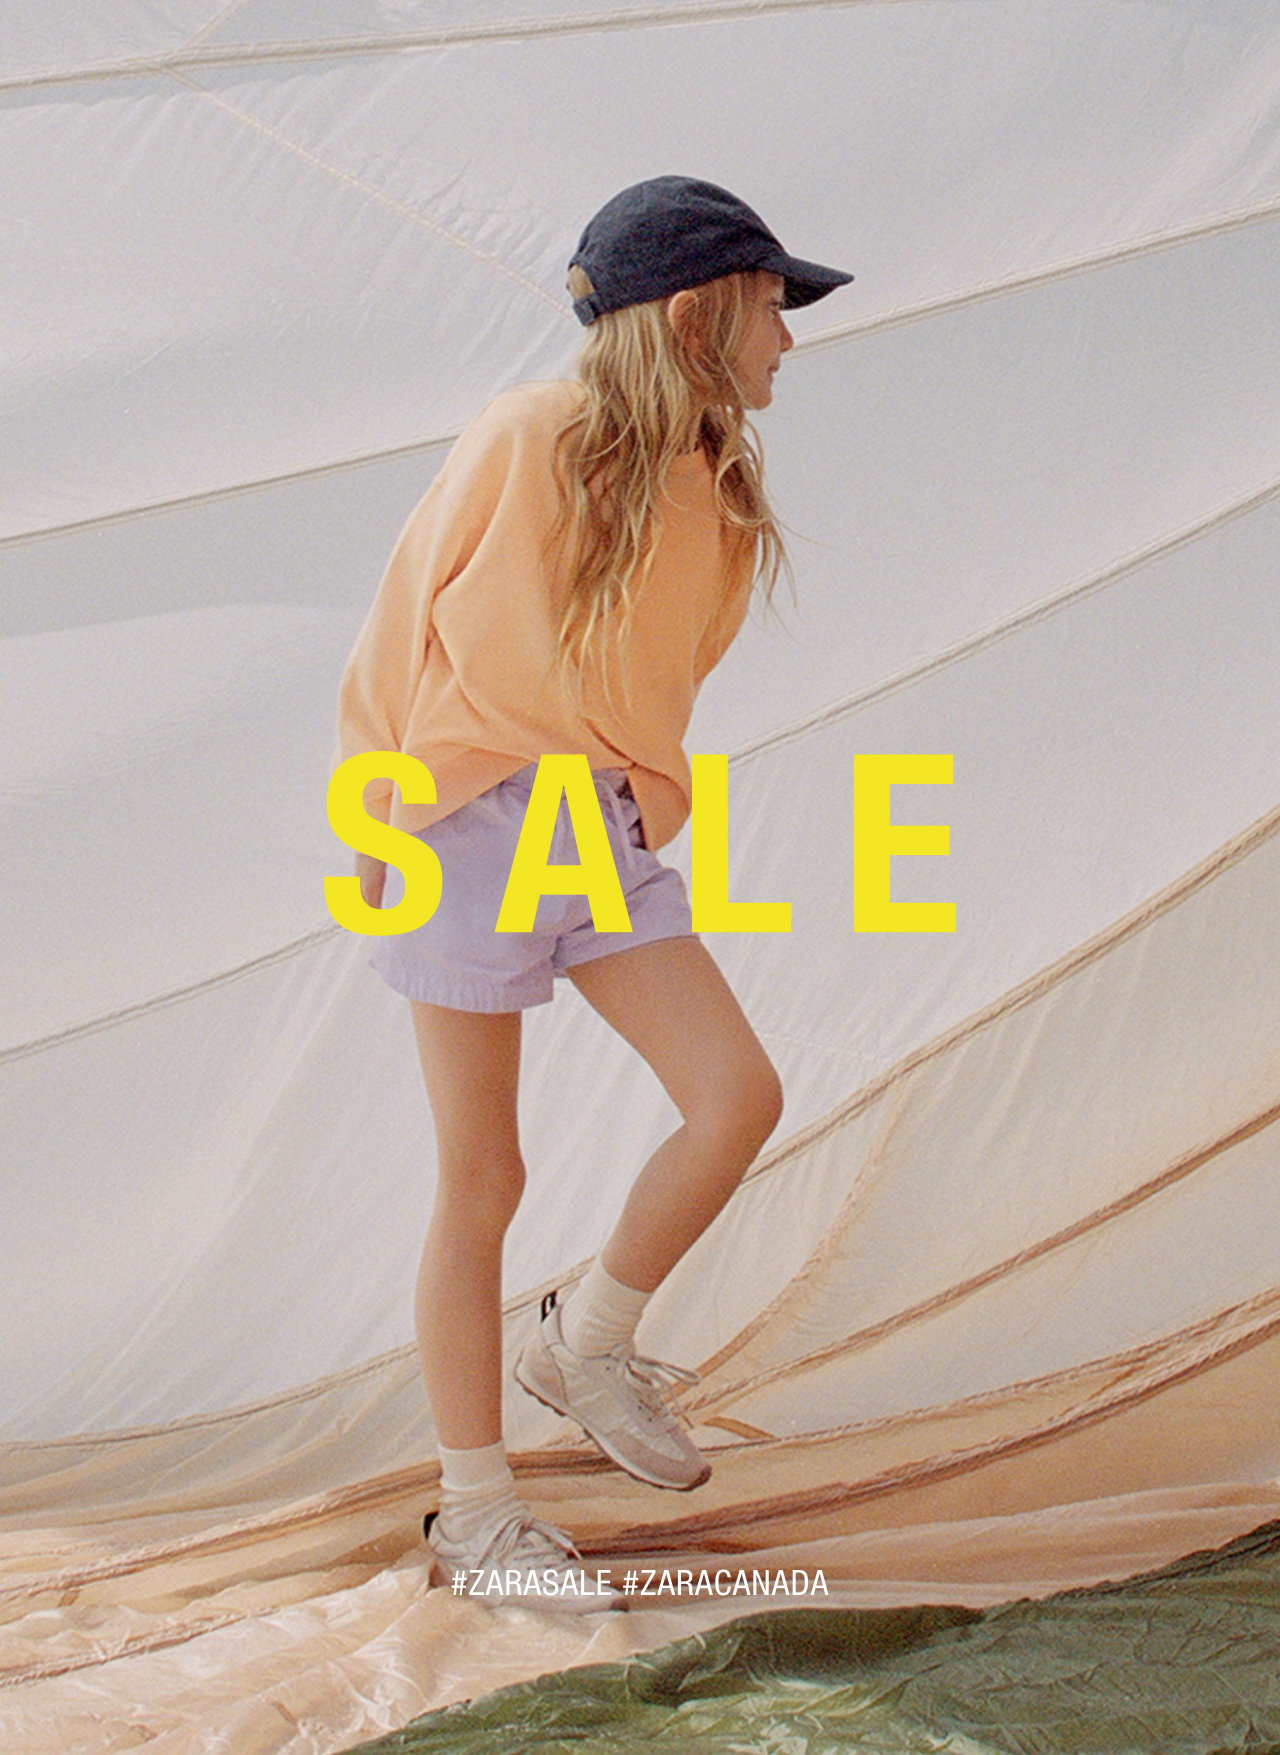 Zara Canada: SALE now in stores and online